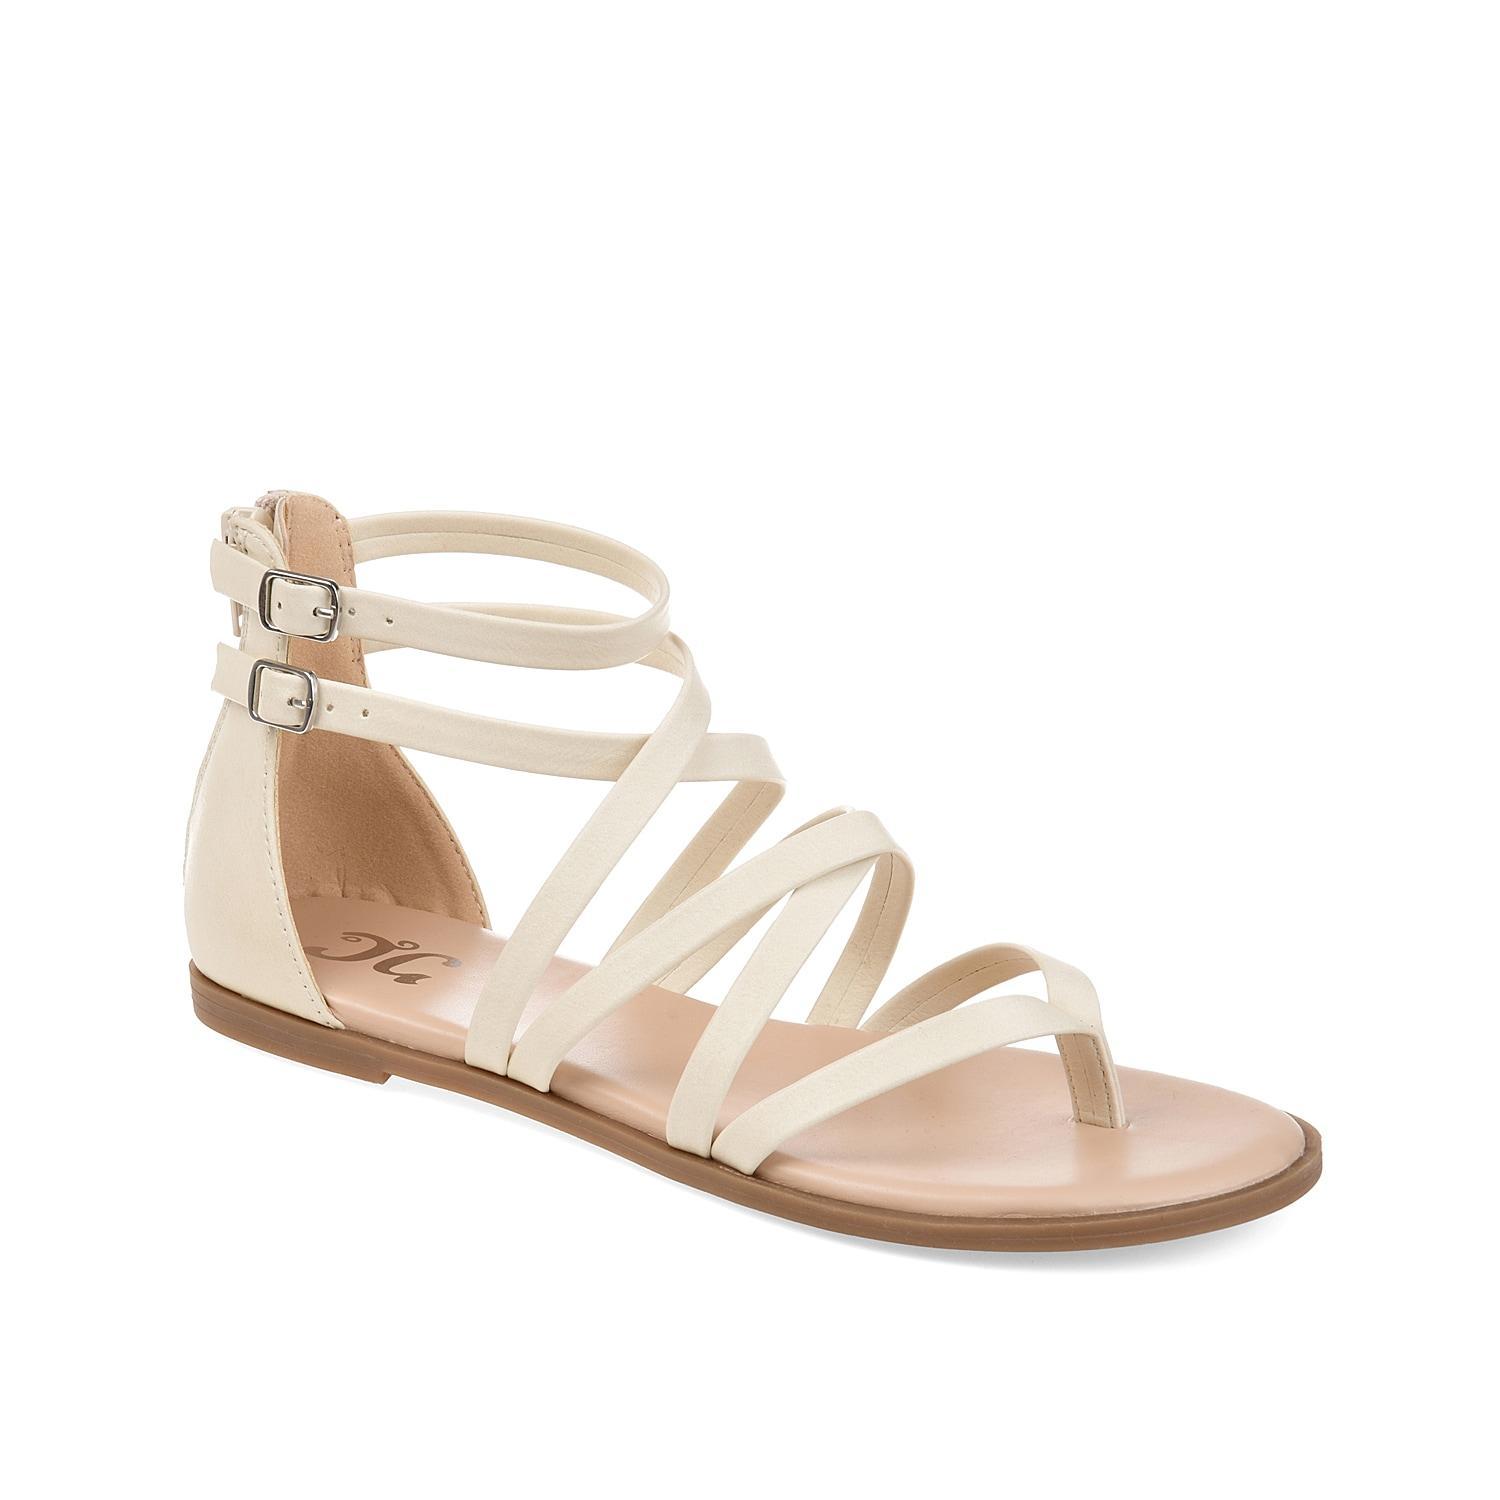 Journee Collection Zailie Womens Gladiator Sandals Pink Product Image